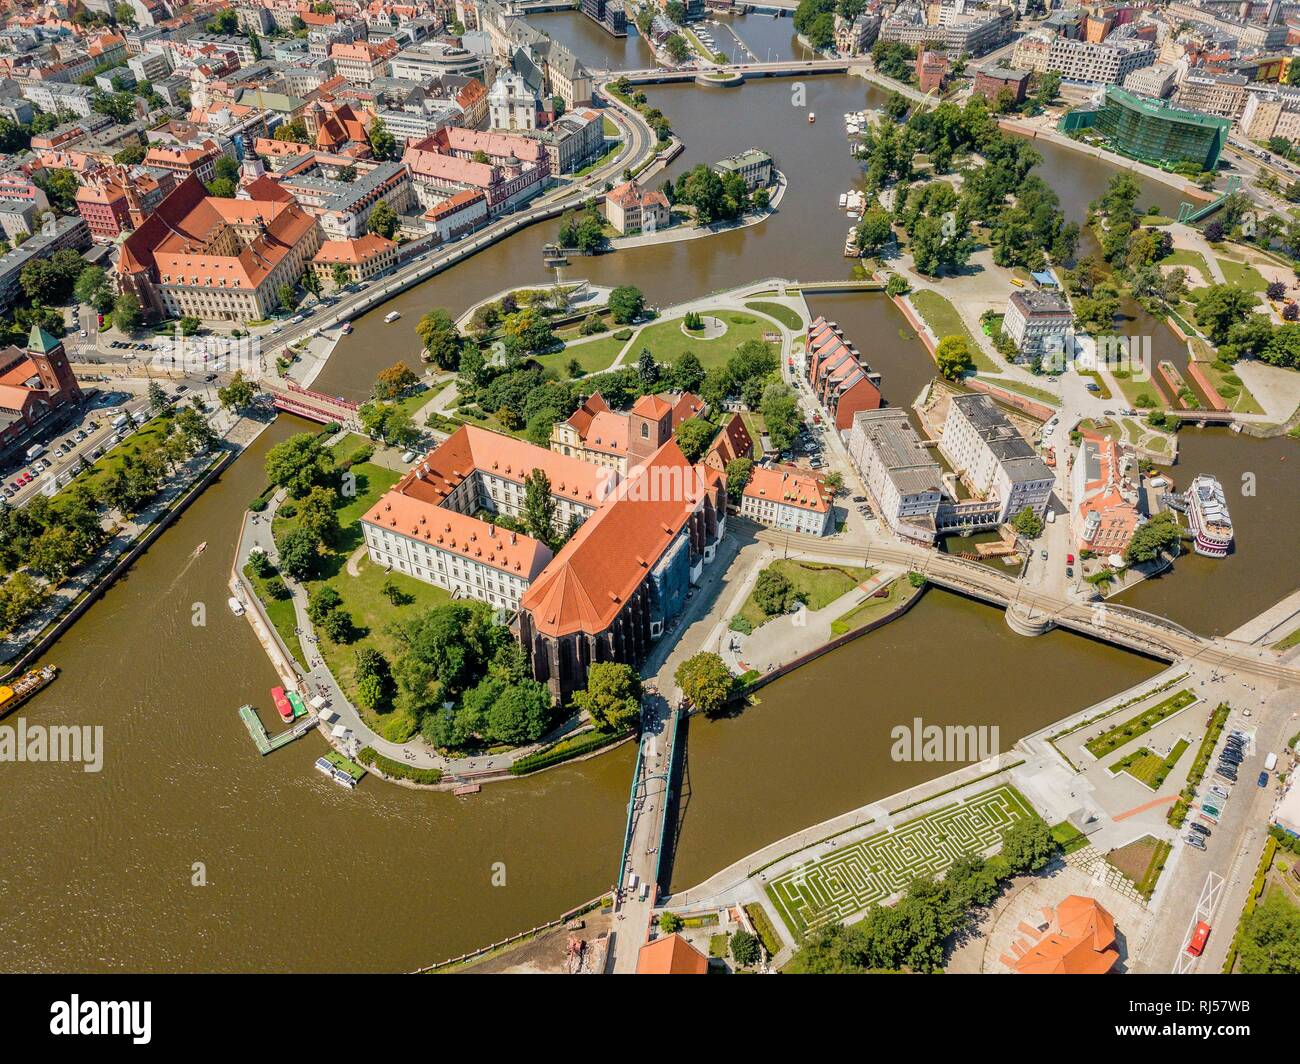 Aerial view of the oldest, historic part of the city, located on island, Wroclaw, Poland Stock Photo